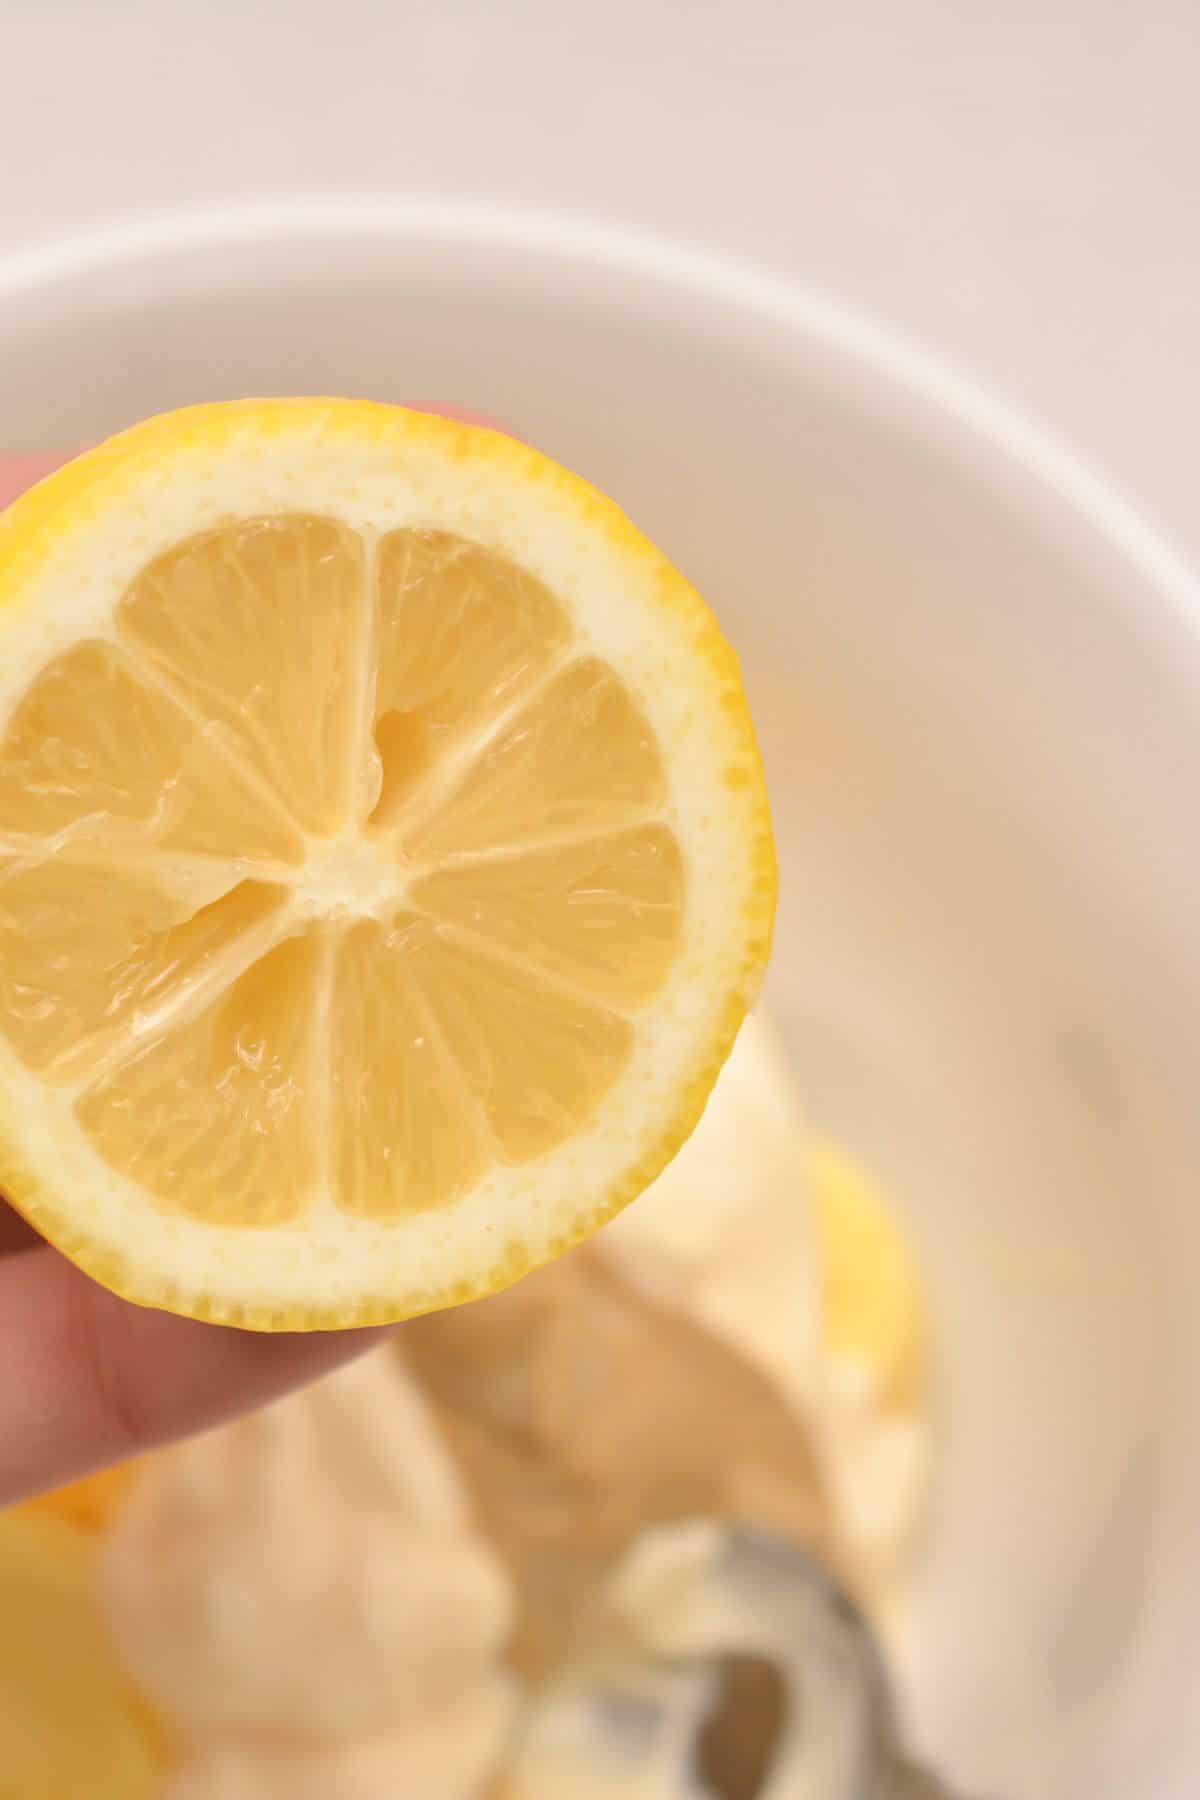 A person holding a slice of lemon over a bowl.